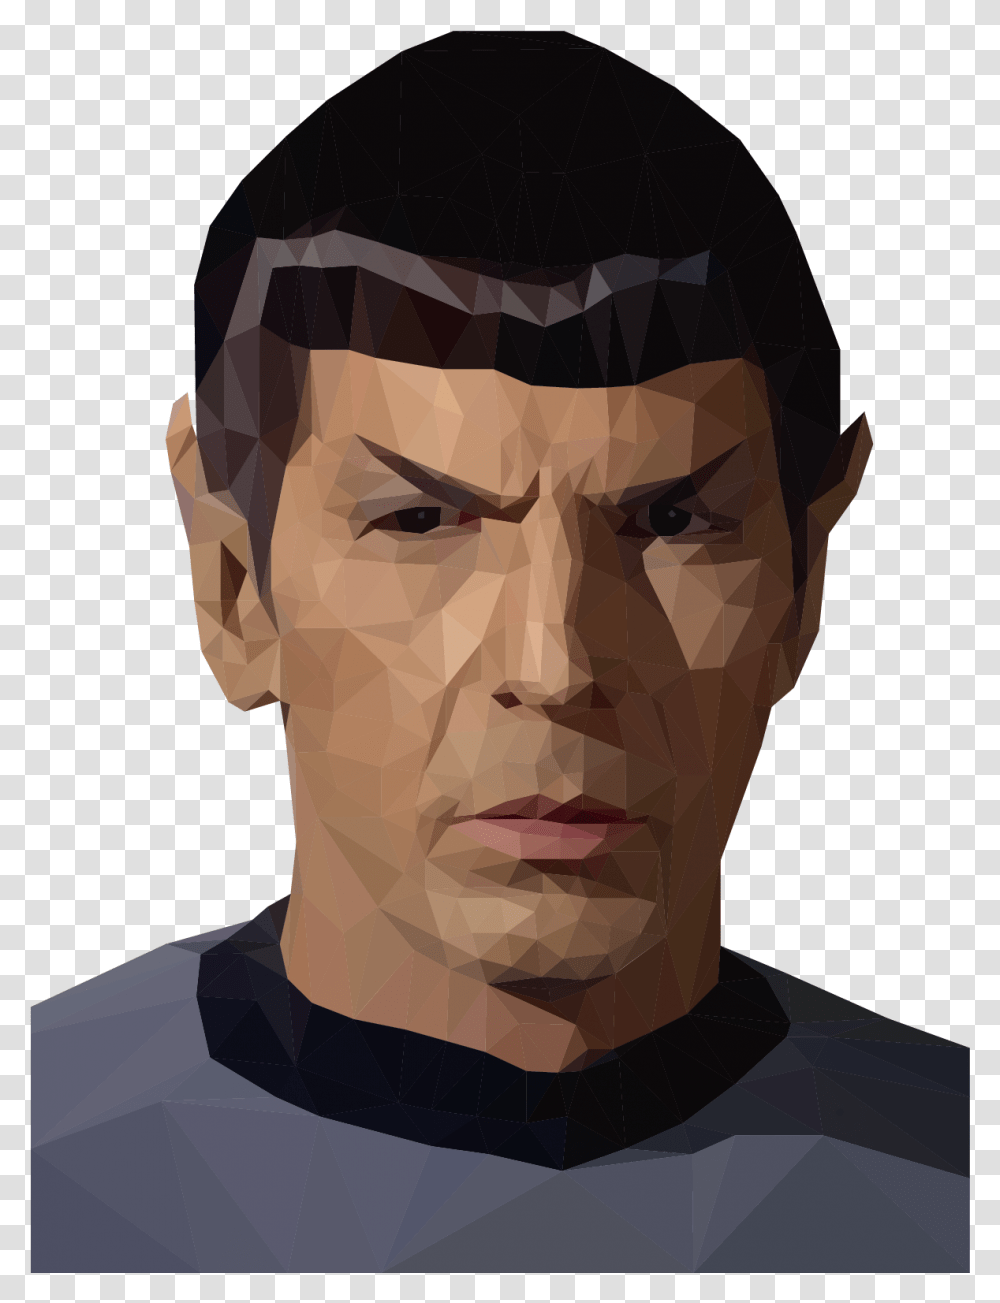 Sign Up To Join The Conversation Aliens In Star Trek, Head, Face, Portrait, Photography Transparent Png